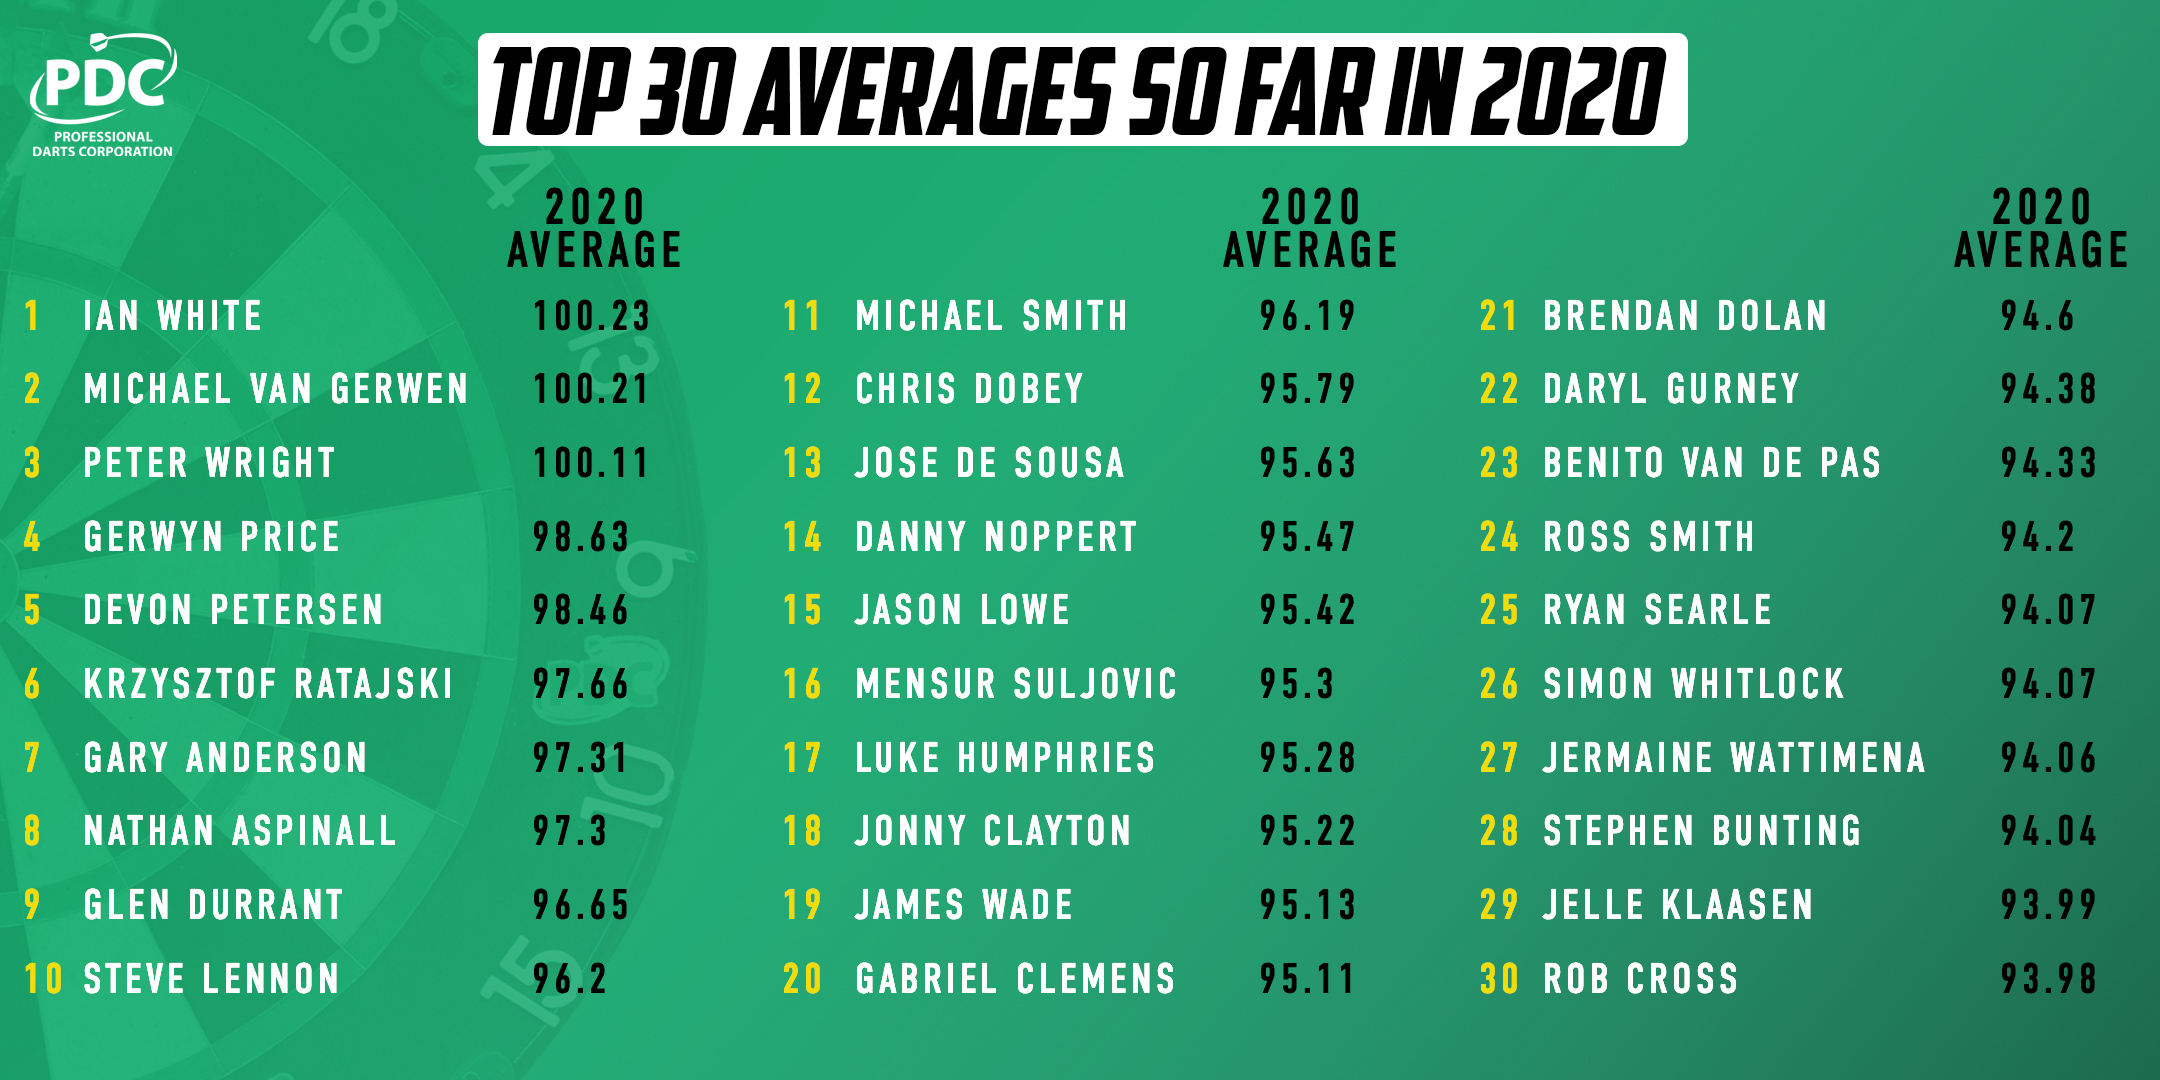 Top 30 averages in 2020